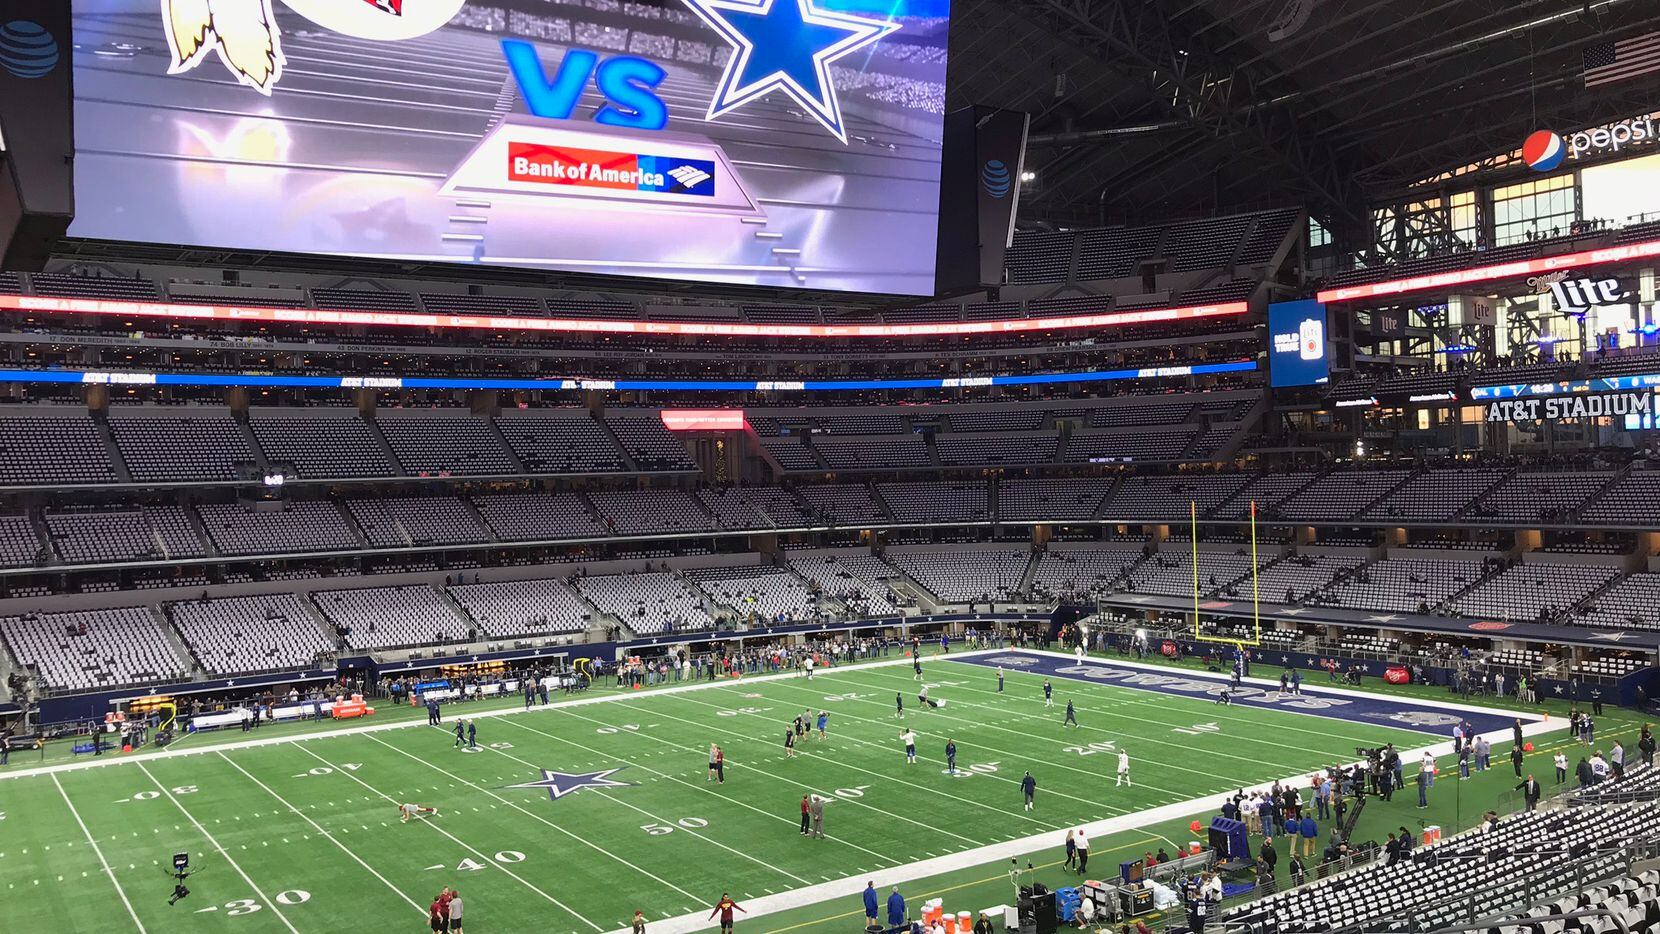 Traffic Issues Or More Empty Seats Throughout At T Stadium As